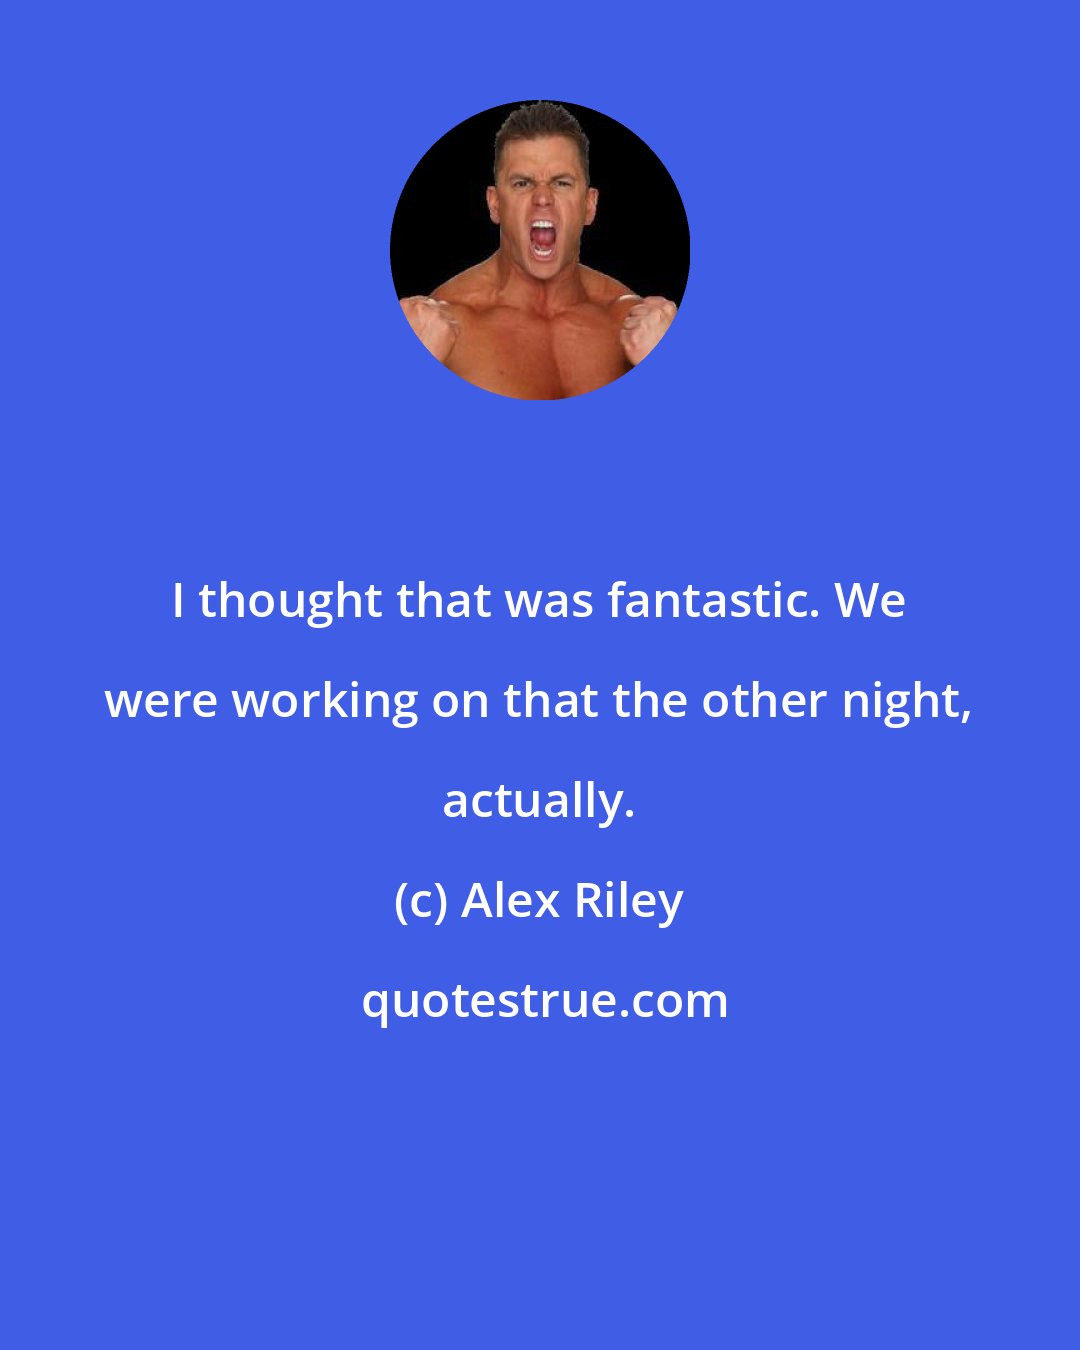 Alex Riley: I thought that was fantastic. We were working on that the other night, actually.